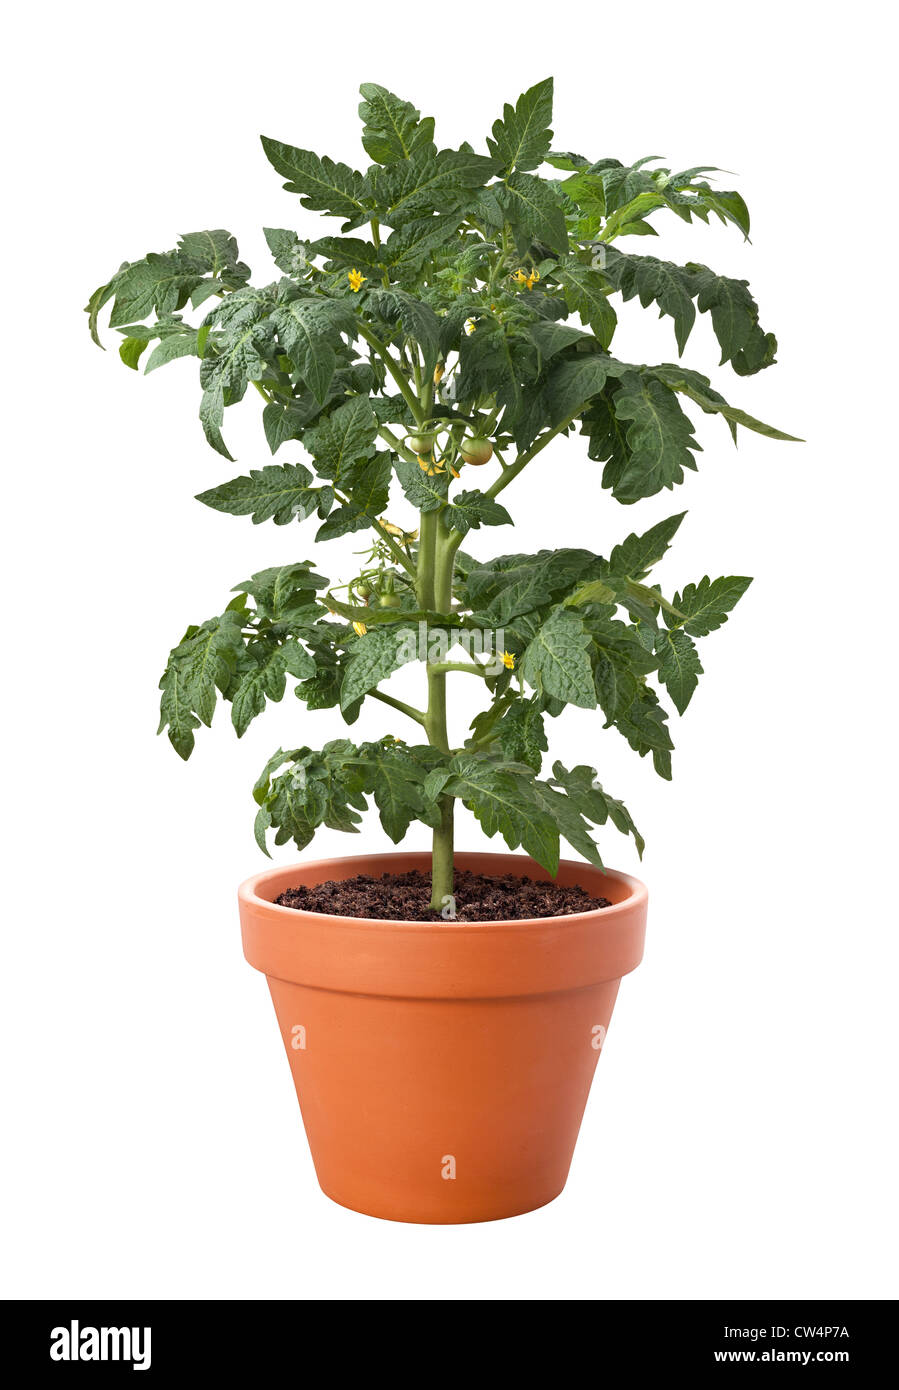 Tomato Plant in a Pot isolated on a white background Stock Photo